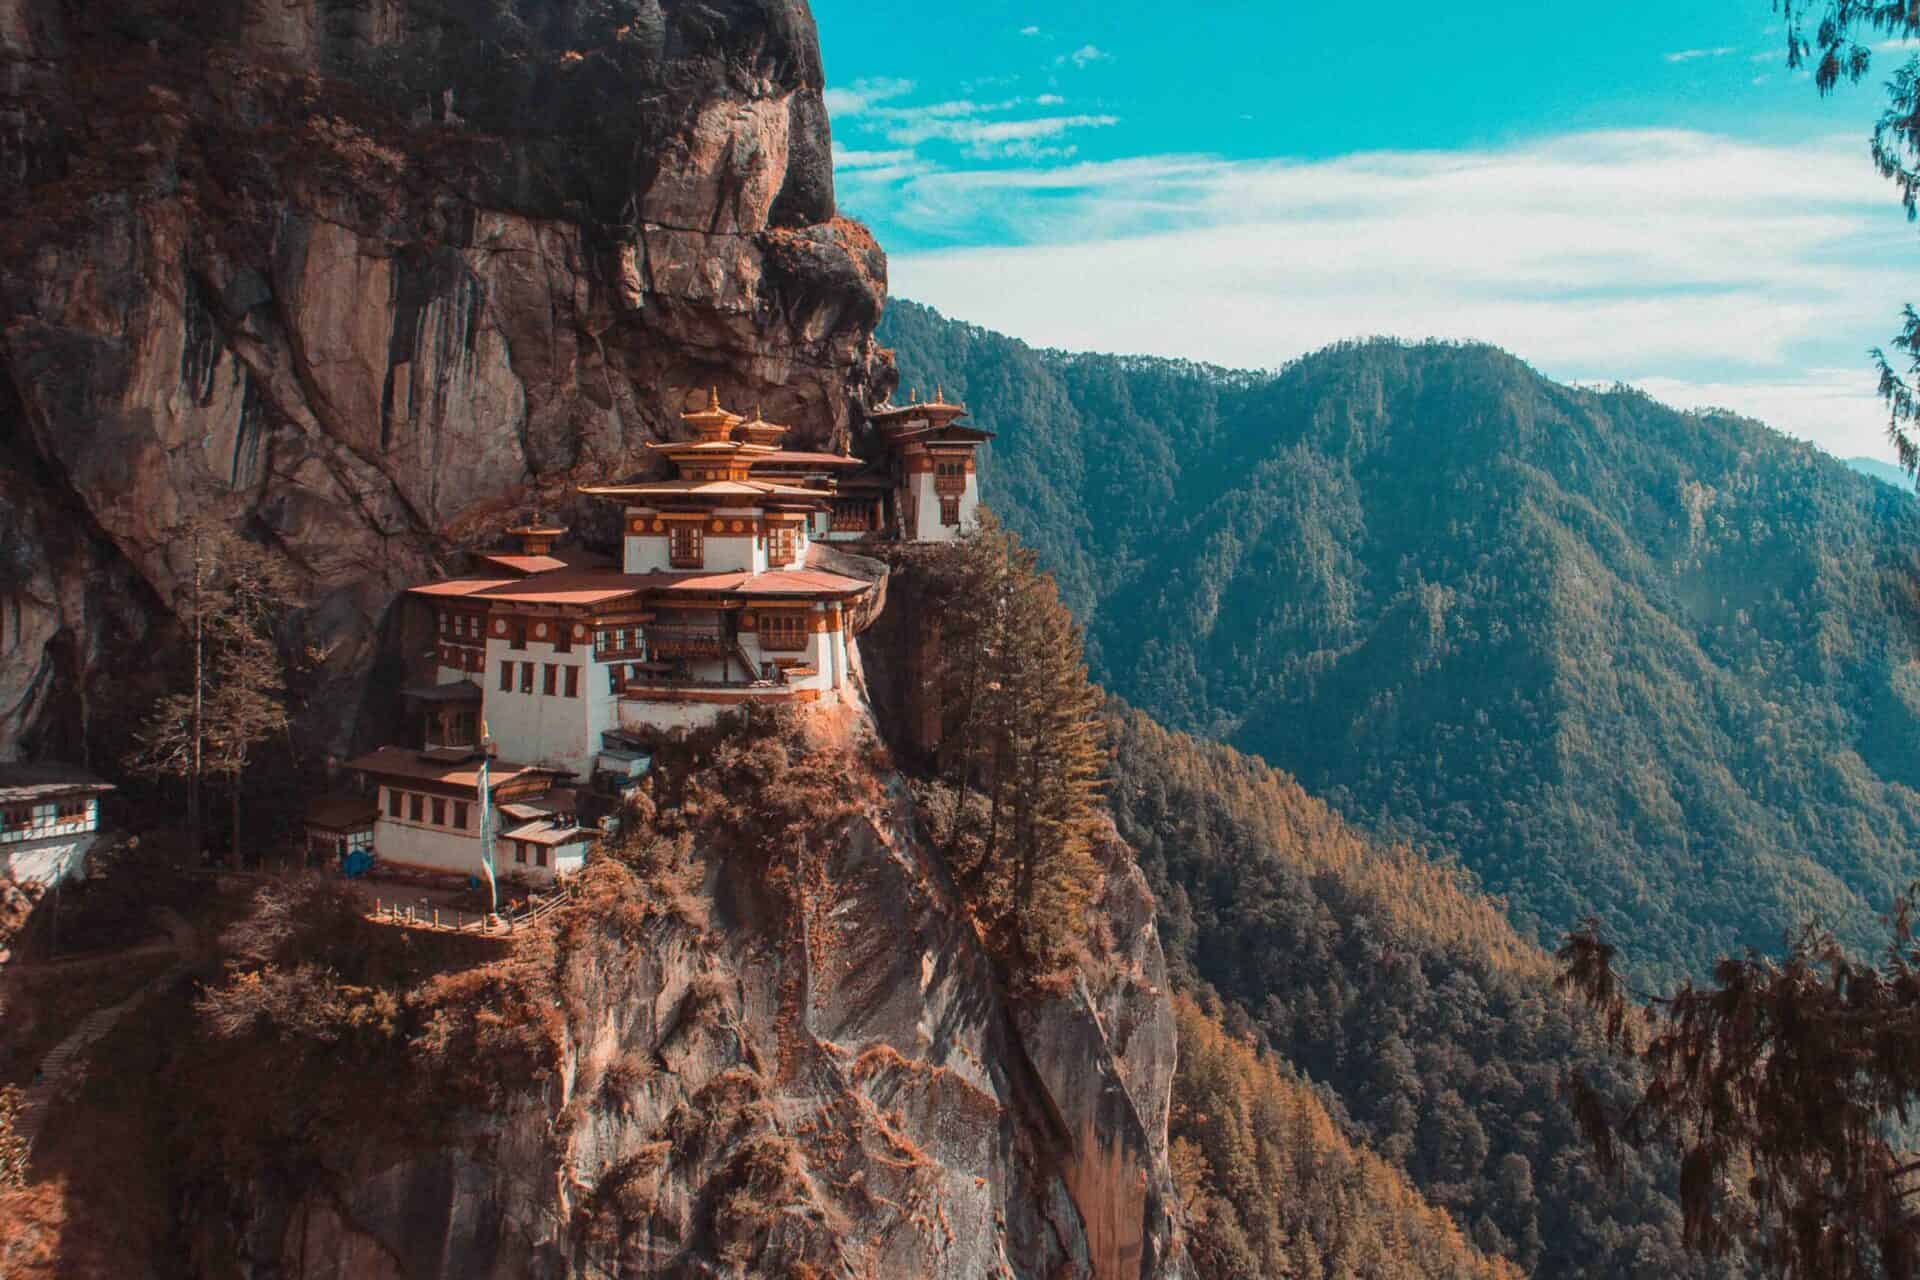 15 Best Things to Do in Bhutan 2023 scaled Bhutan Weather in November,What is the weather like in Bhutan in November?,What kind of clothing should I pack for a trip to Bhutan in November?,Are there any festivals or events in Bhutan in November?,Is November a good time for outdoor activities in Bhutan?,Are there any travel considerations for visiting Bhutan in November?,What makes visiting Bhutan in November special?,What to Expect when Visiting Bhutan in November,Average Temperature in November